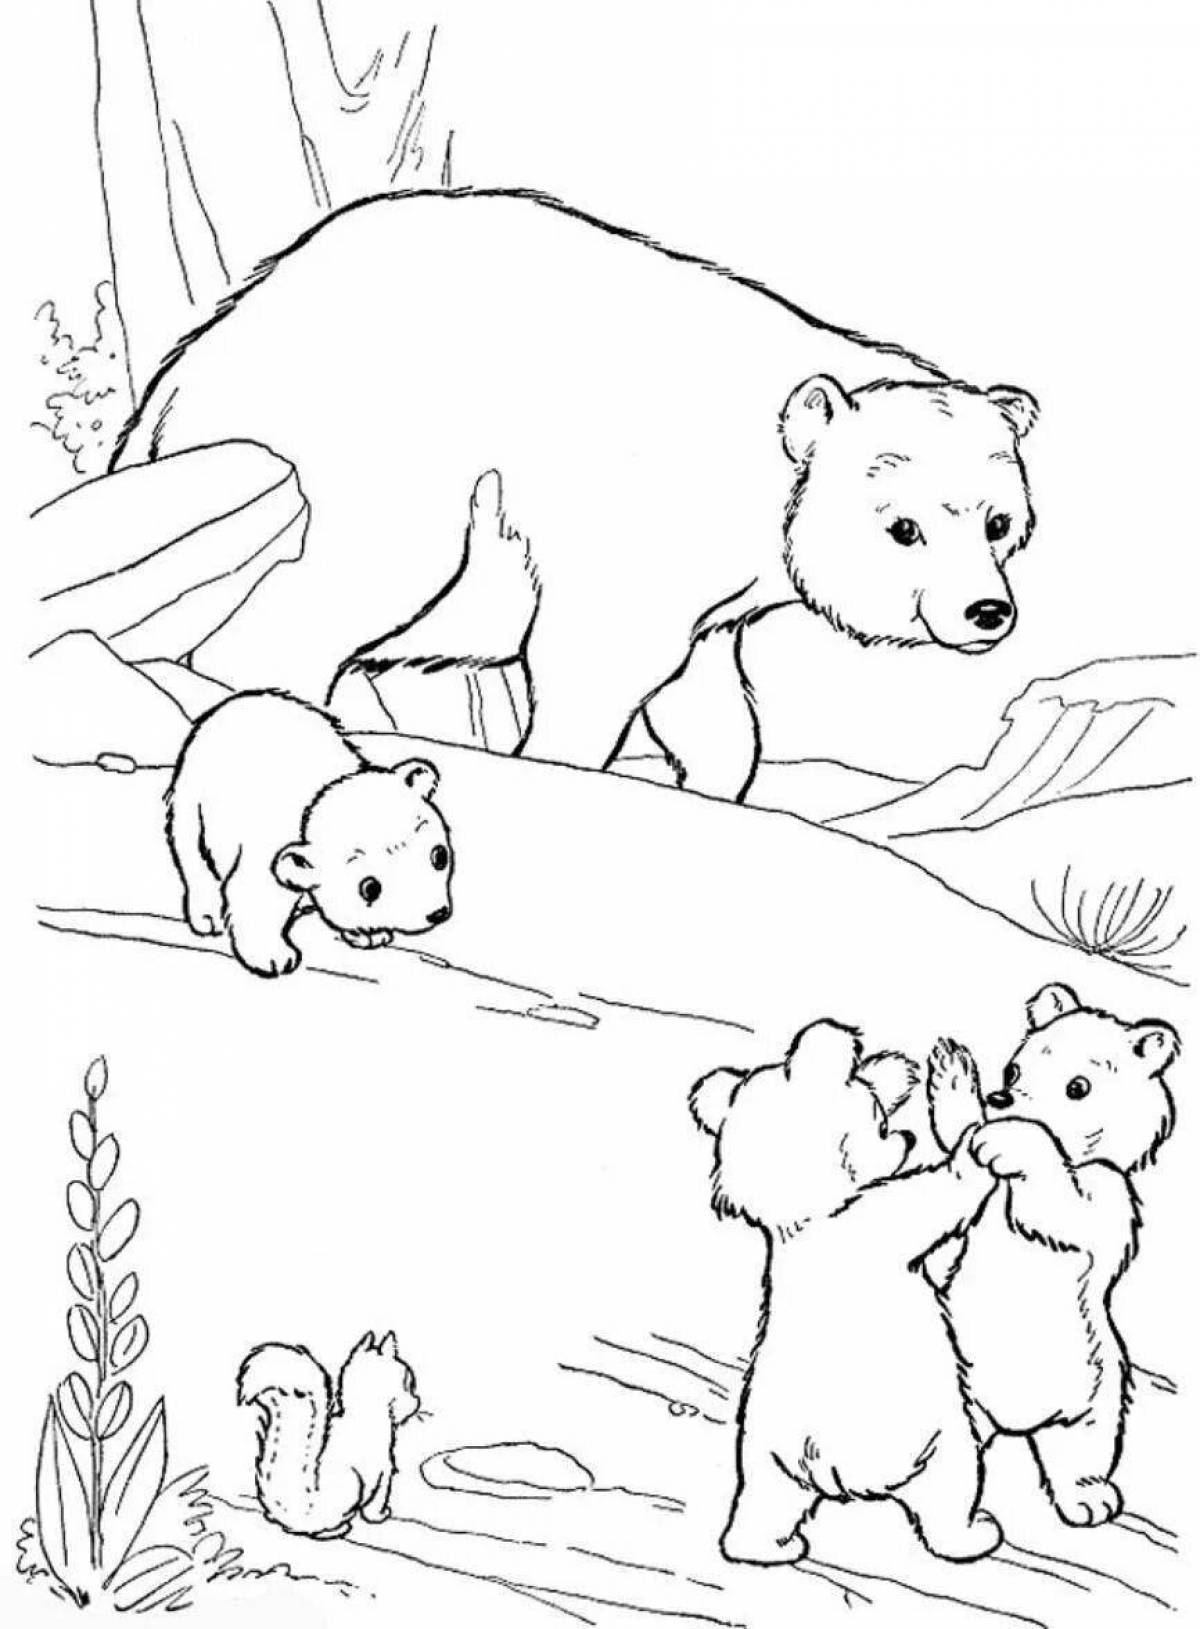 Outstanding bear coloring book for 5-6 year olds